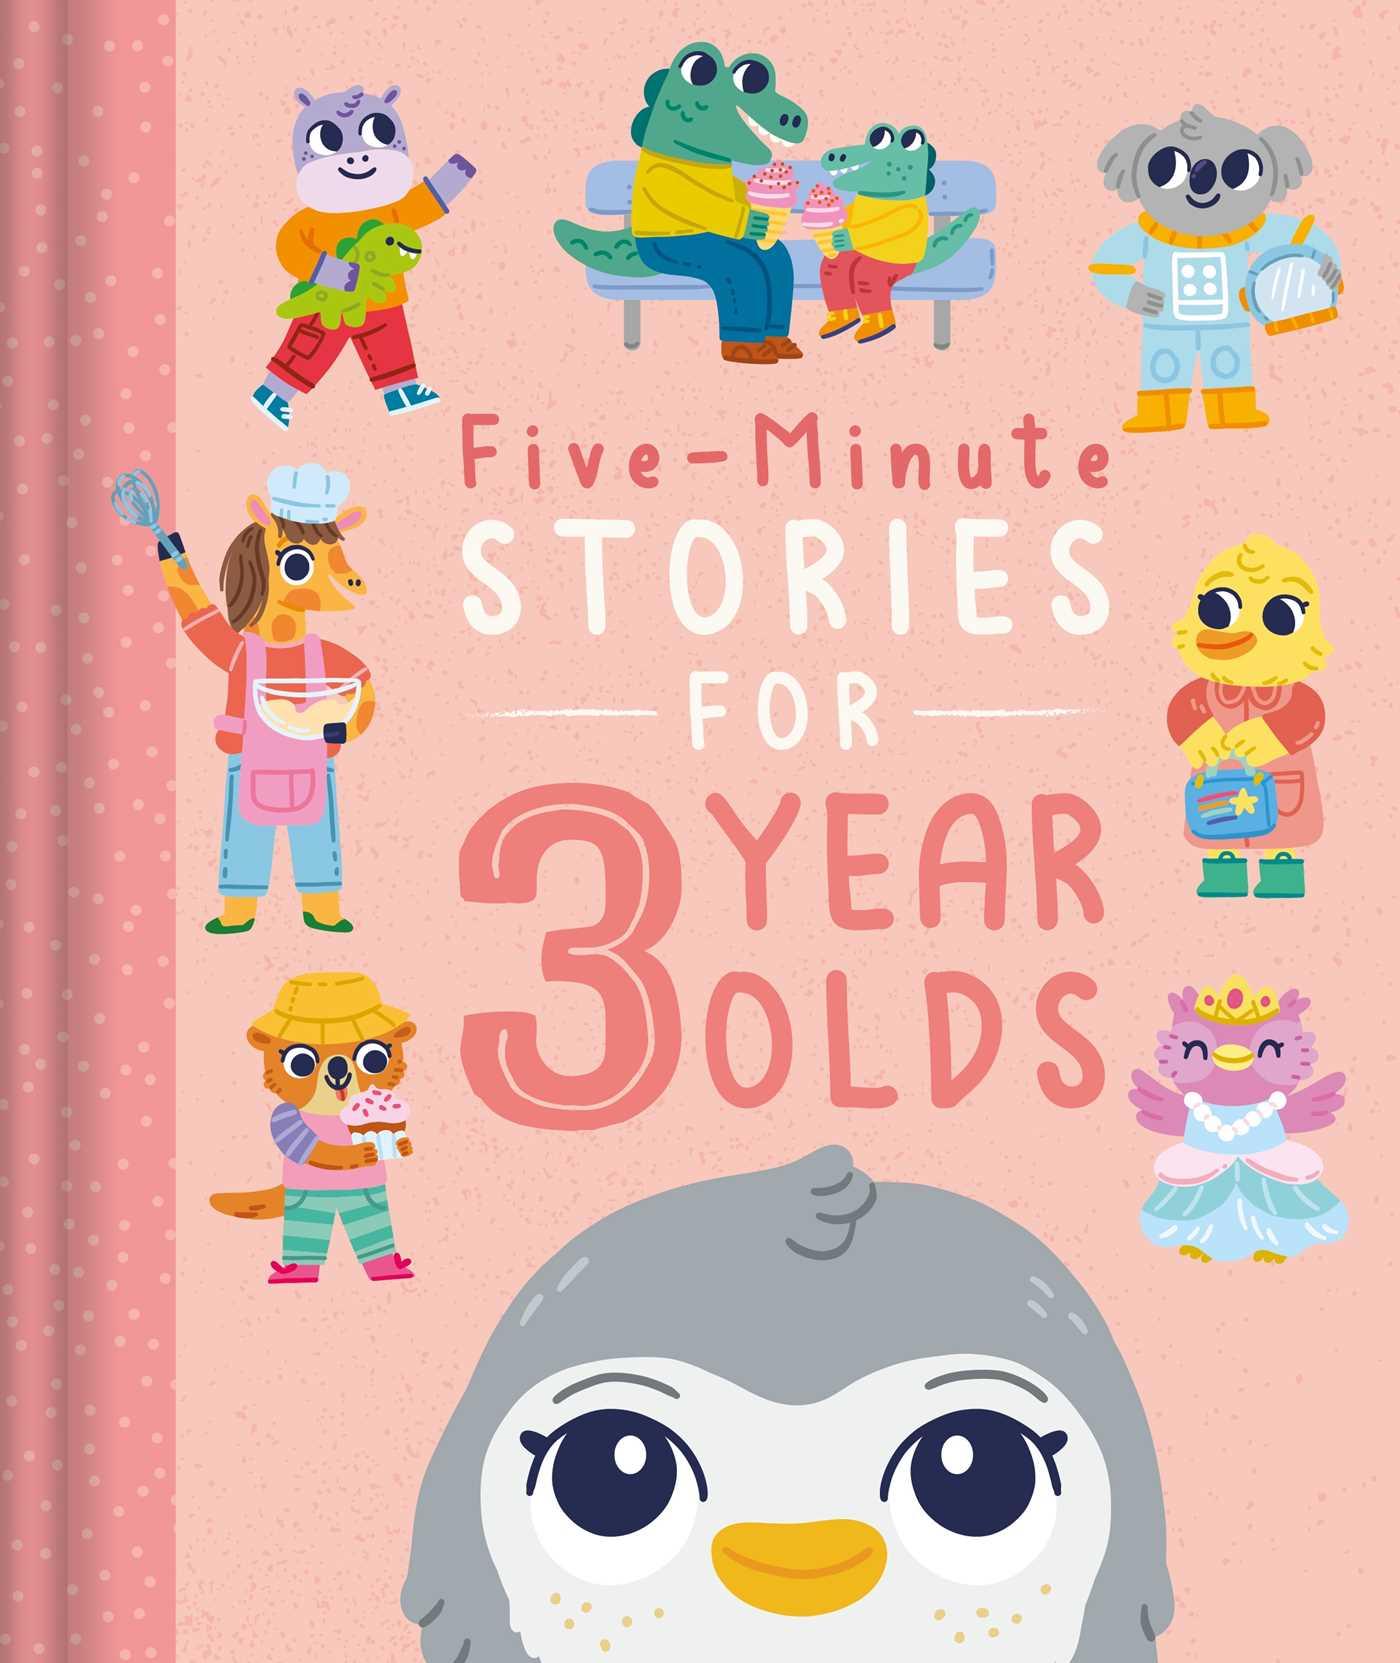 Książka Five-Minute Stories for 3 Year Olds: With 7 Stories, 1 for Every Day of the Week Lizzy Doyle